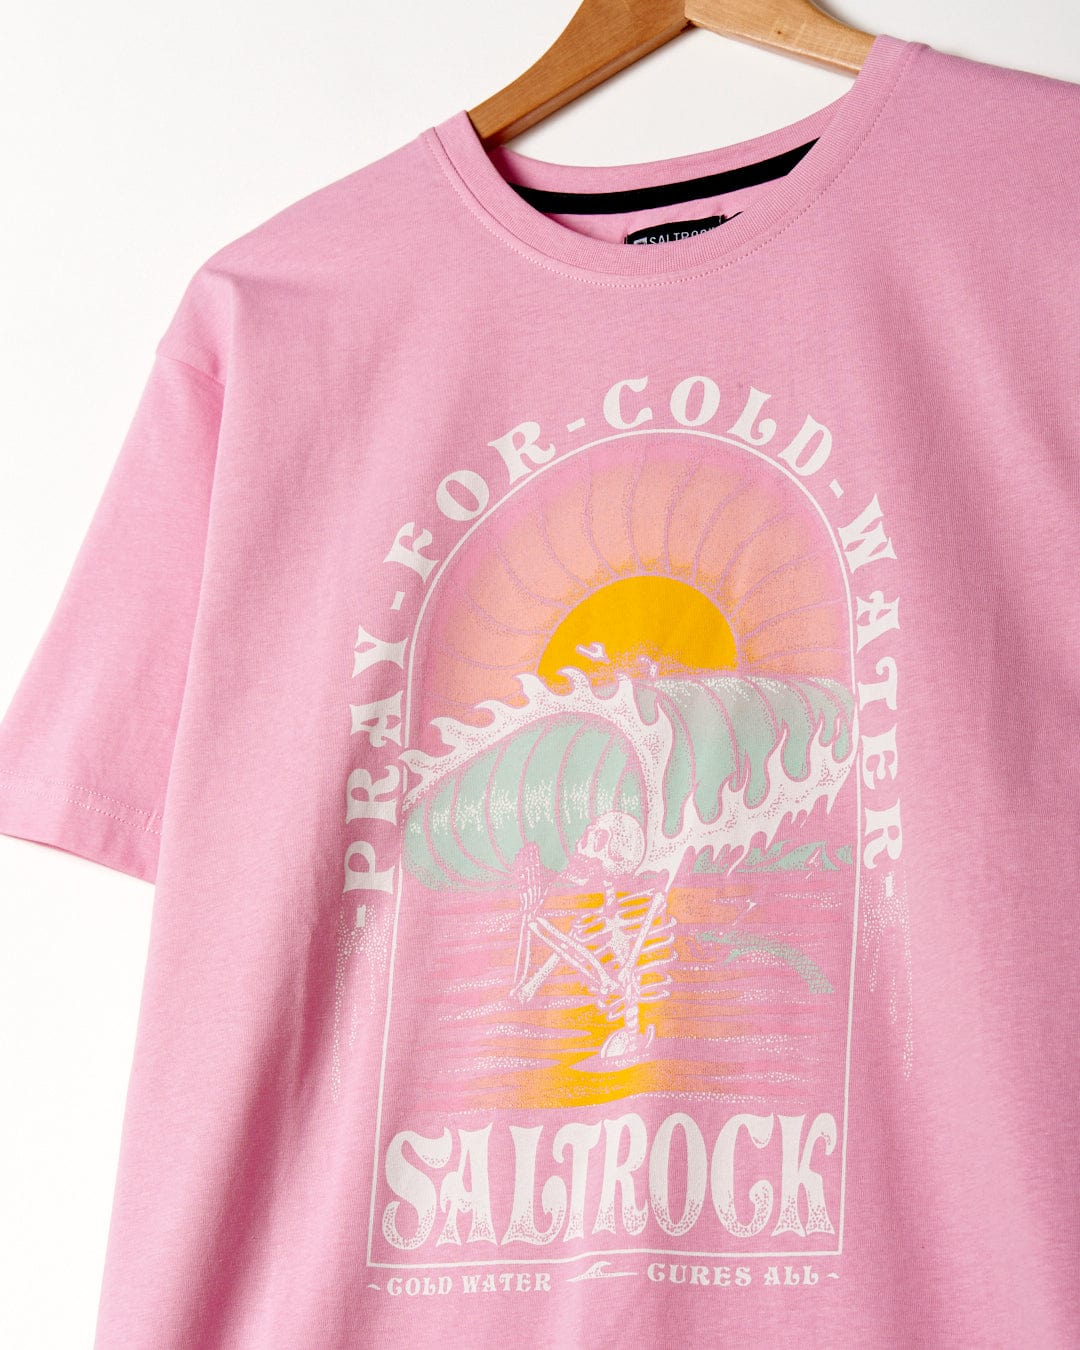 A pink crewneck t-shirt that says "pray for Cold Water - Womens Short Sleeve T-Shirt - Pink.